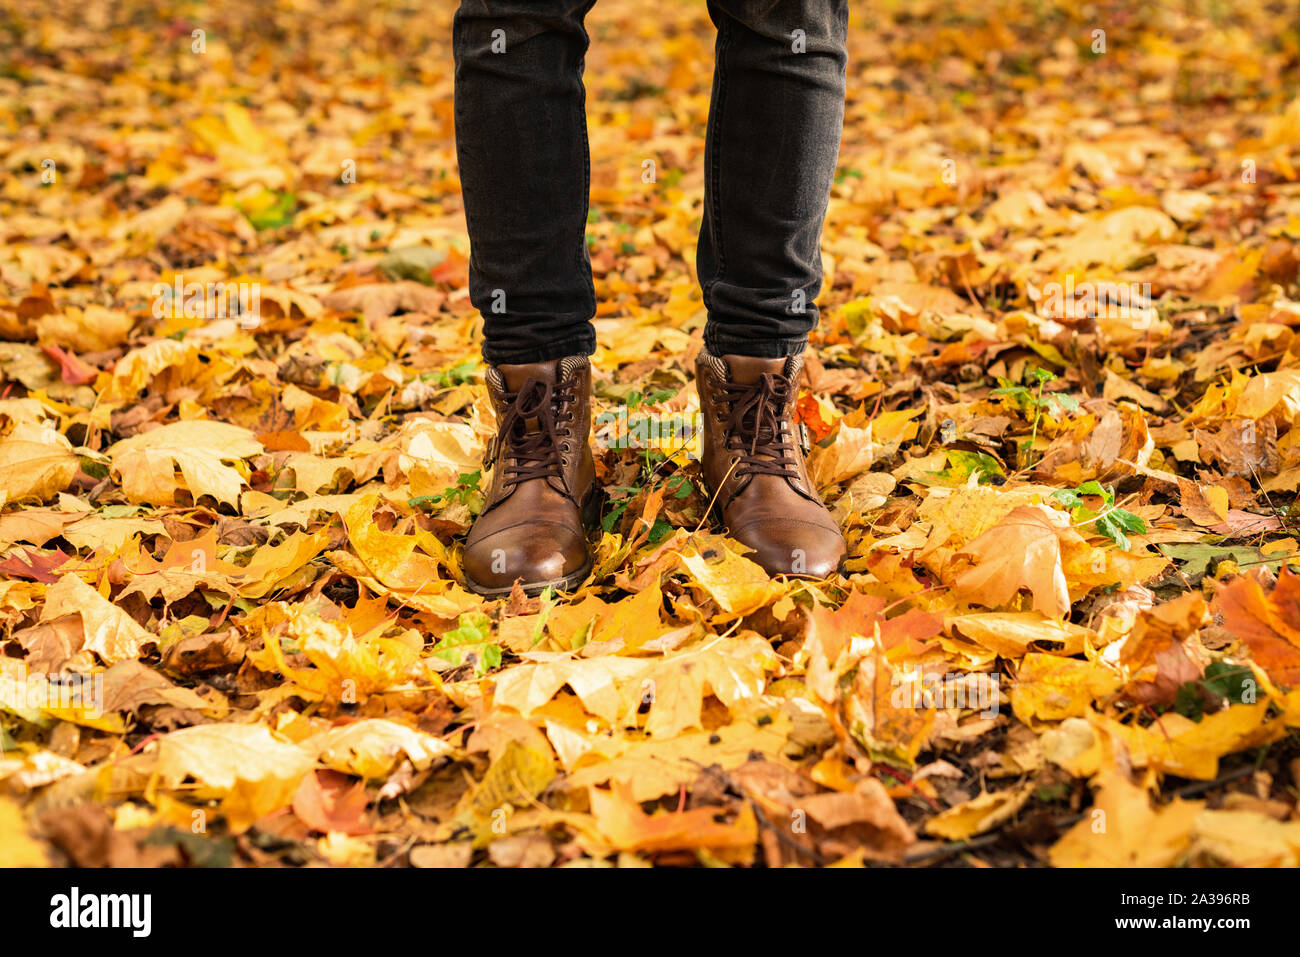 Hipster legs in brown shoes in autumn park with yellow and red maple fallen leaves around. Seasonal conceptual background image Stock Photo